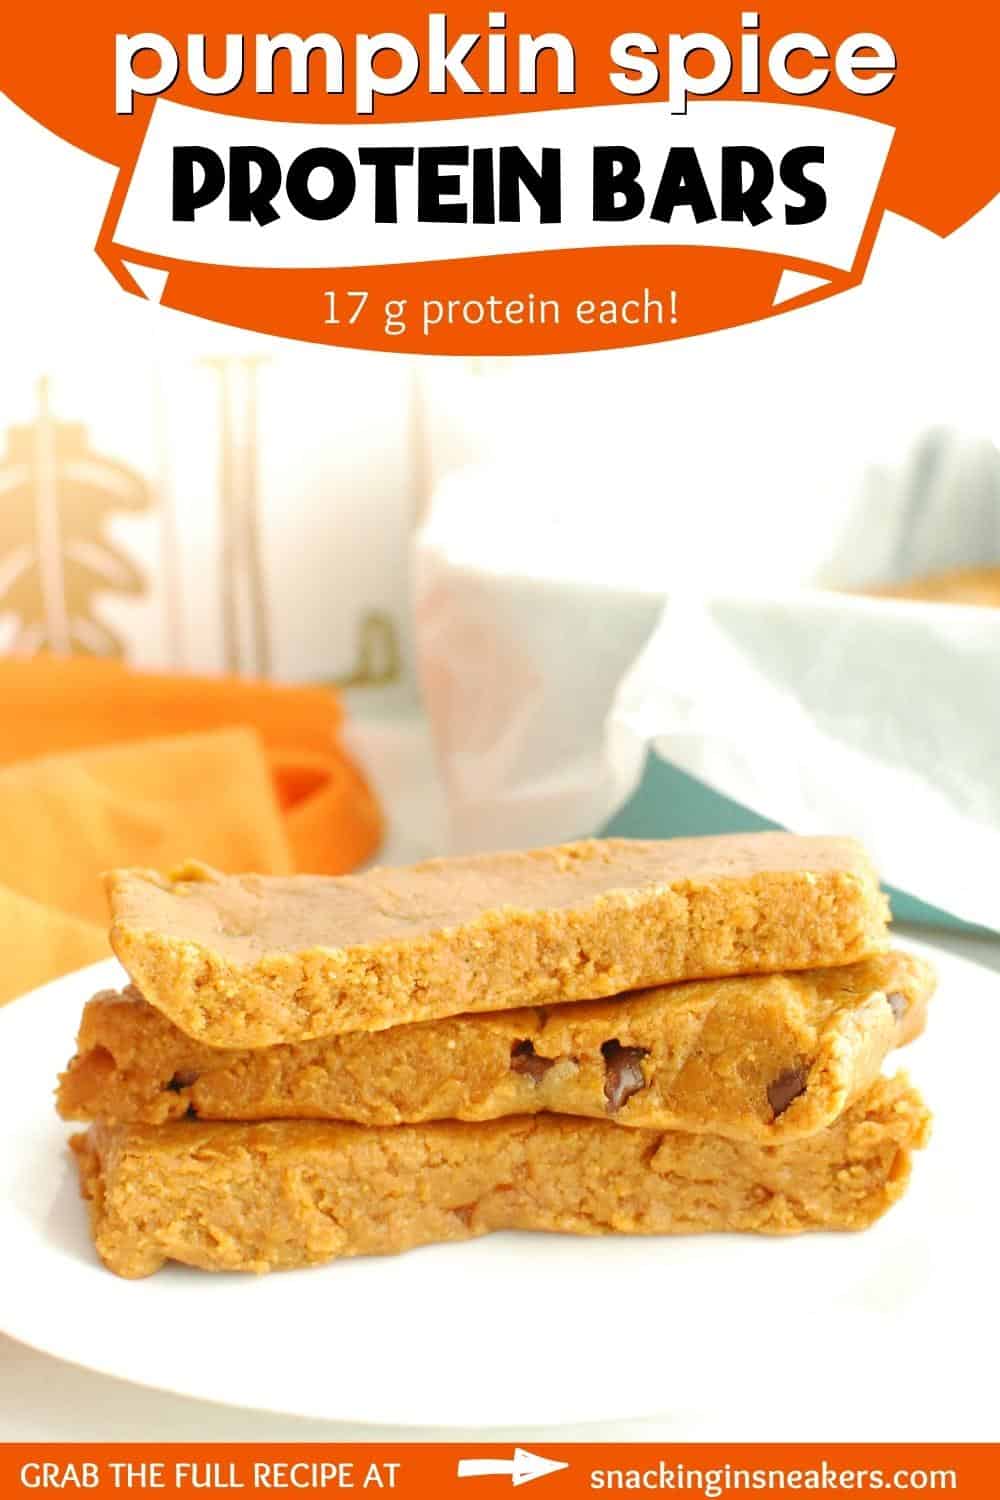 Several pumpkin protein bars on a plate with a text overlay with the name of the recipe.